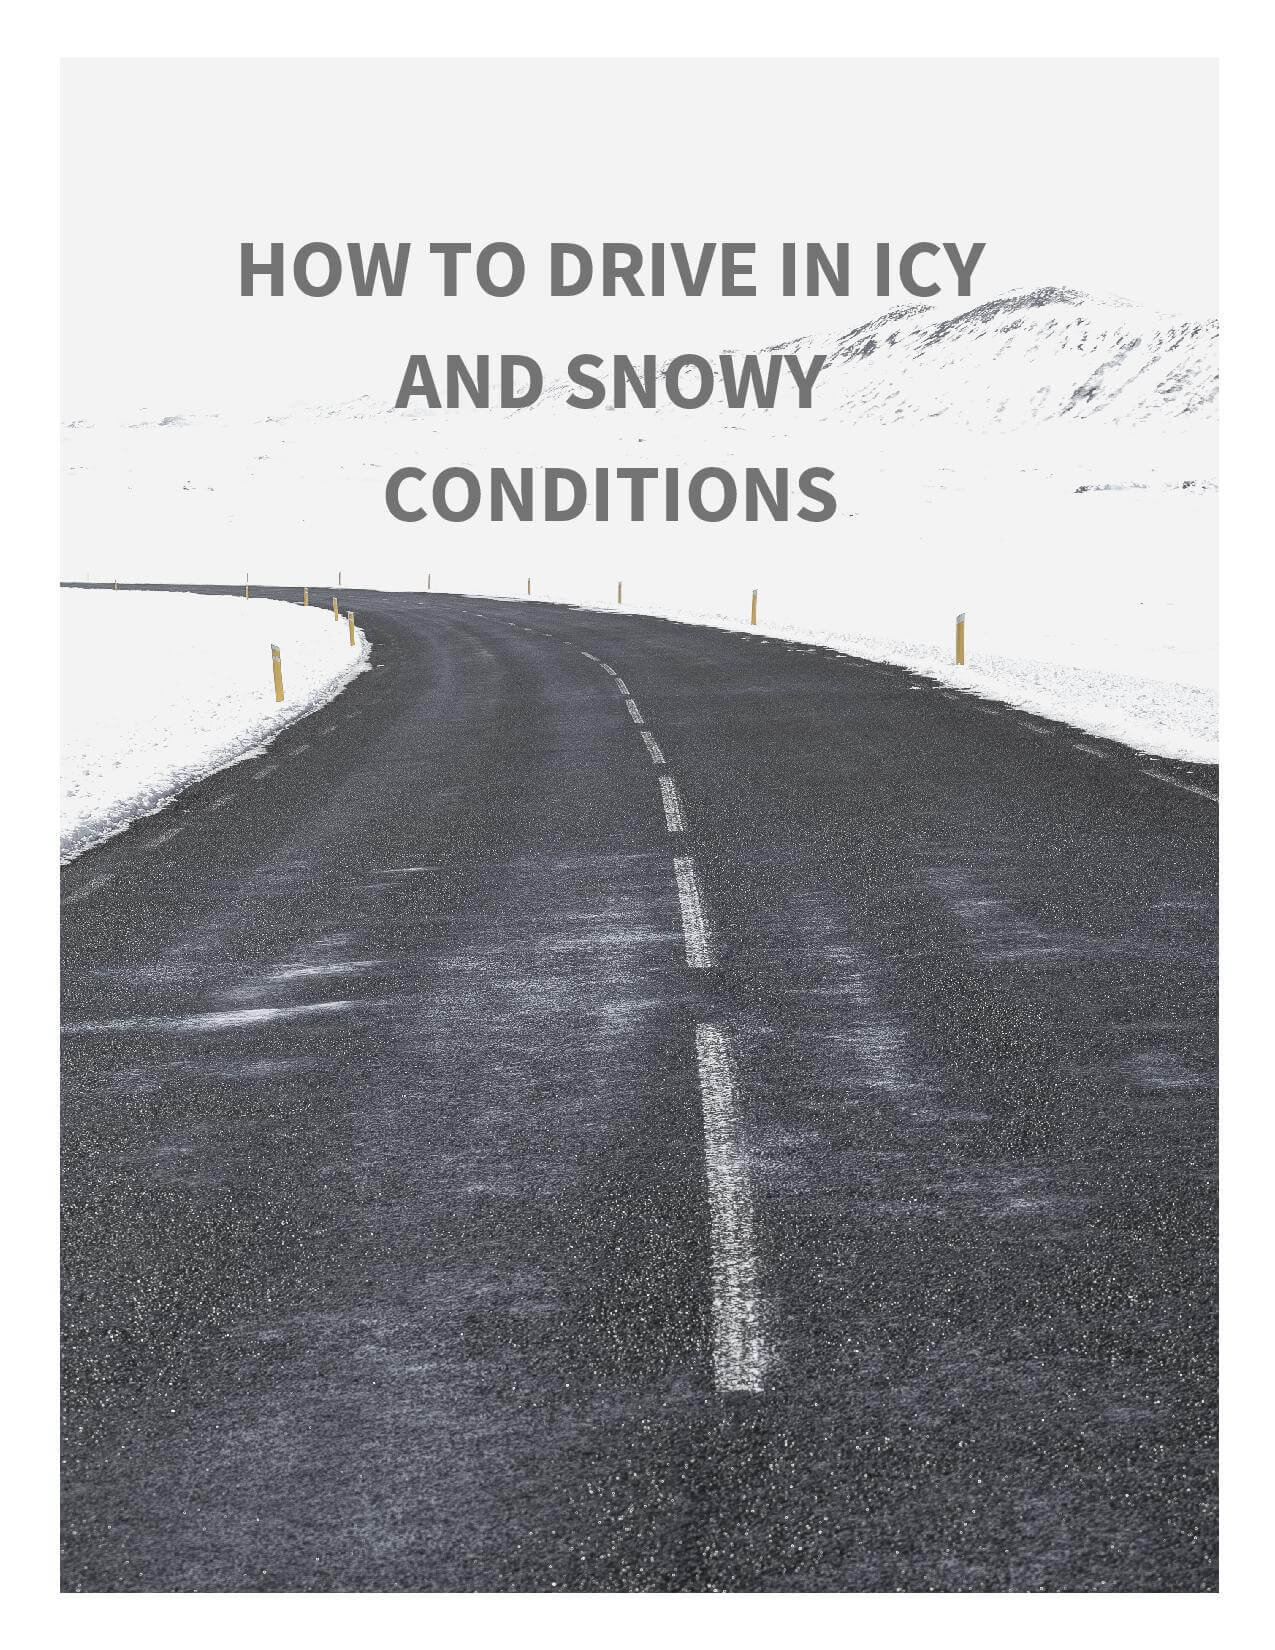 How to drive in icy and snowy conditions